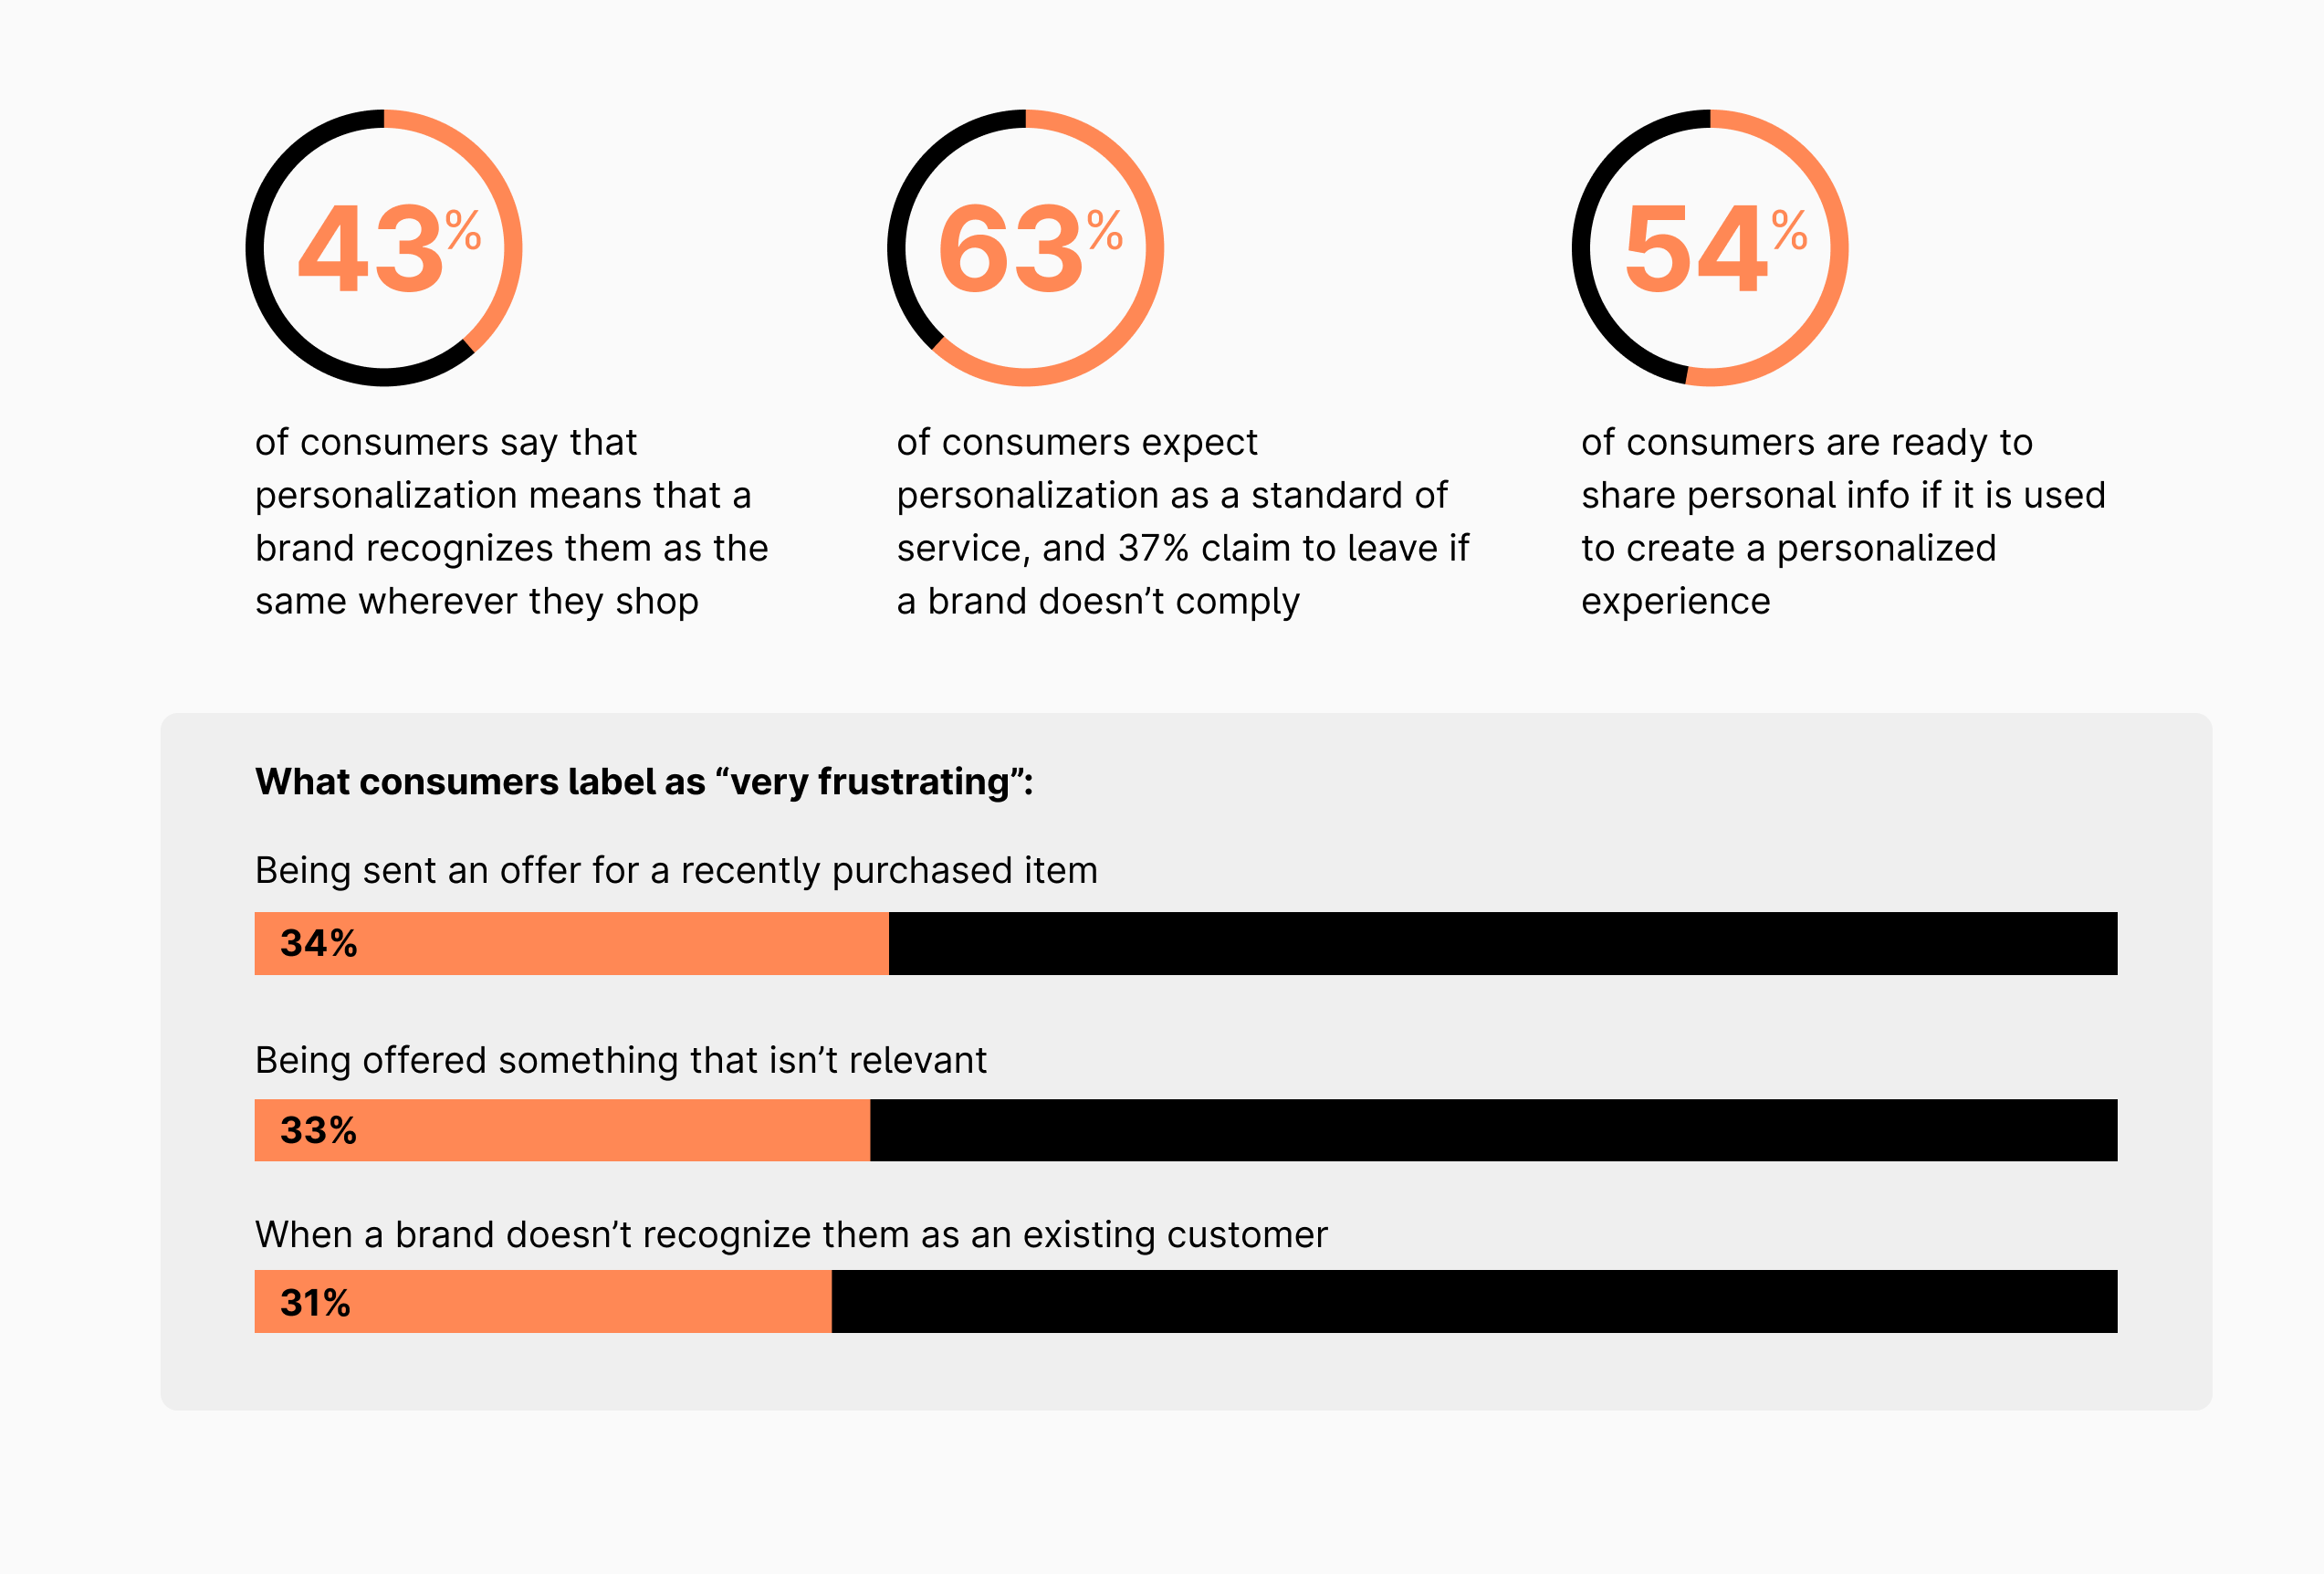 Stats about personalization to improve customer experience in retail